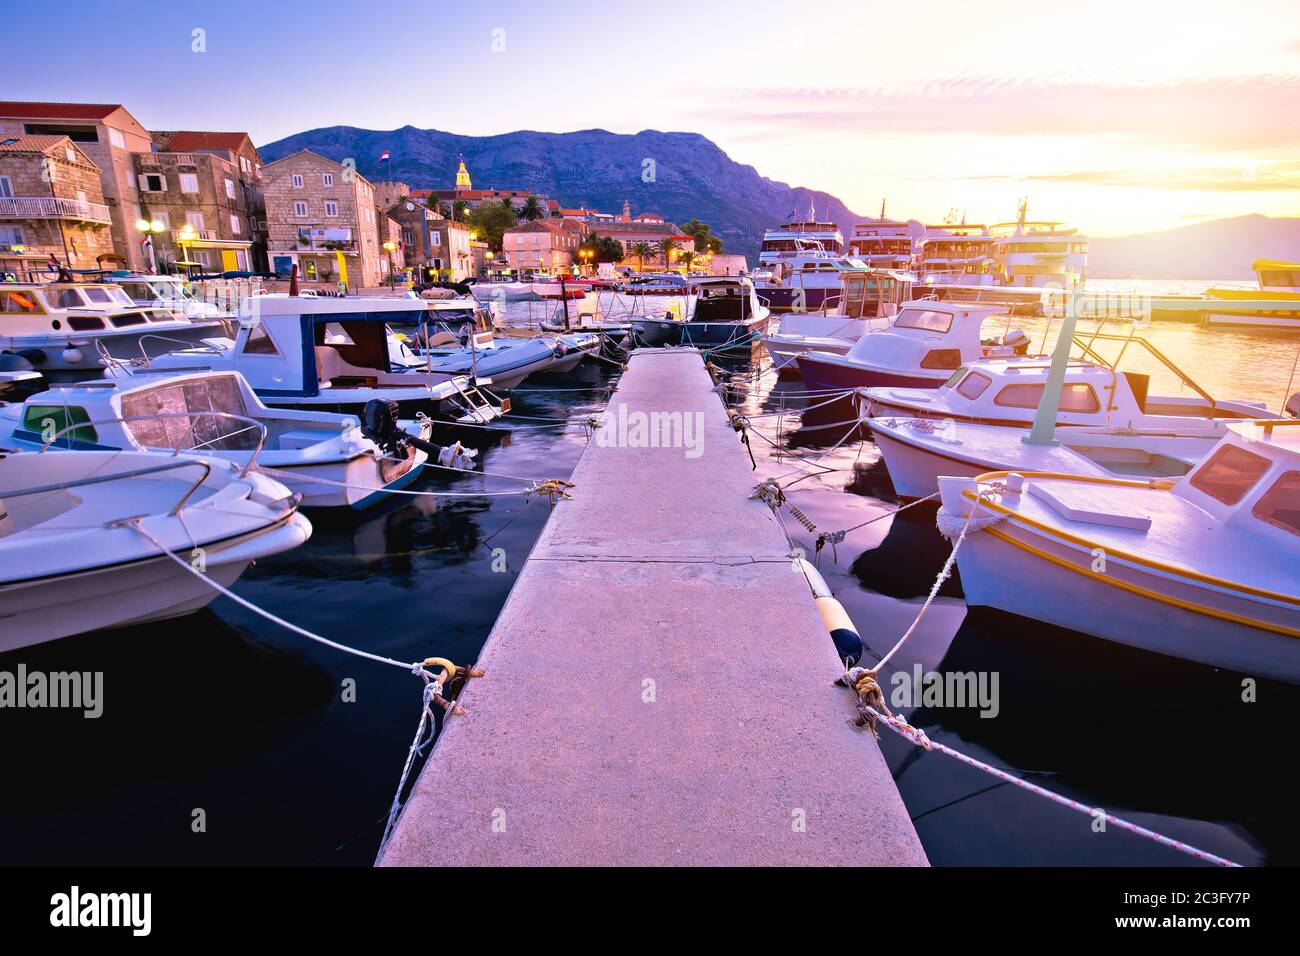 Town of Korcula coastline and harbor colorful sunset view Stock Photo